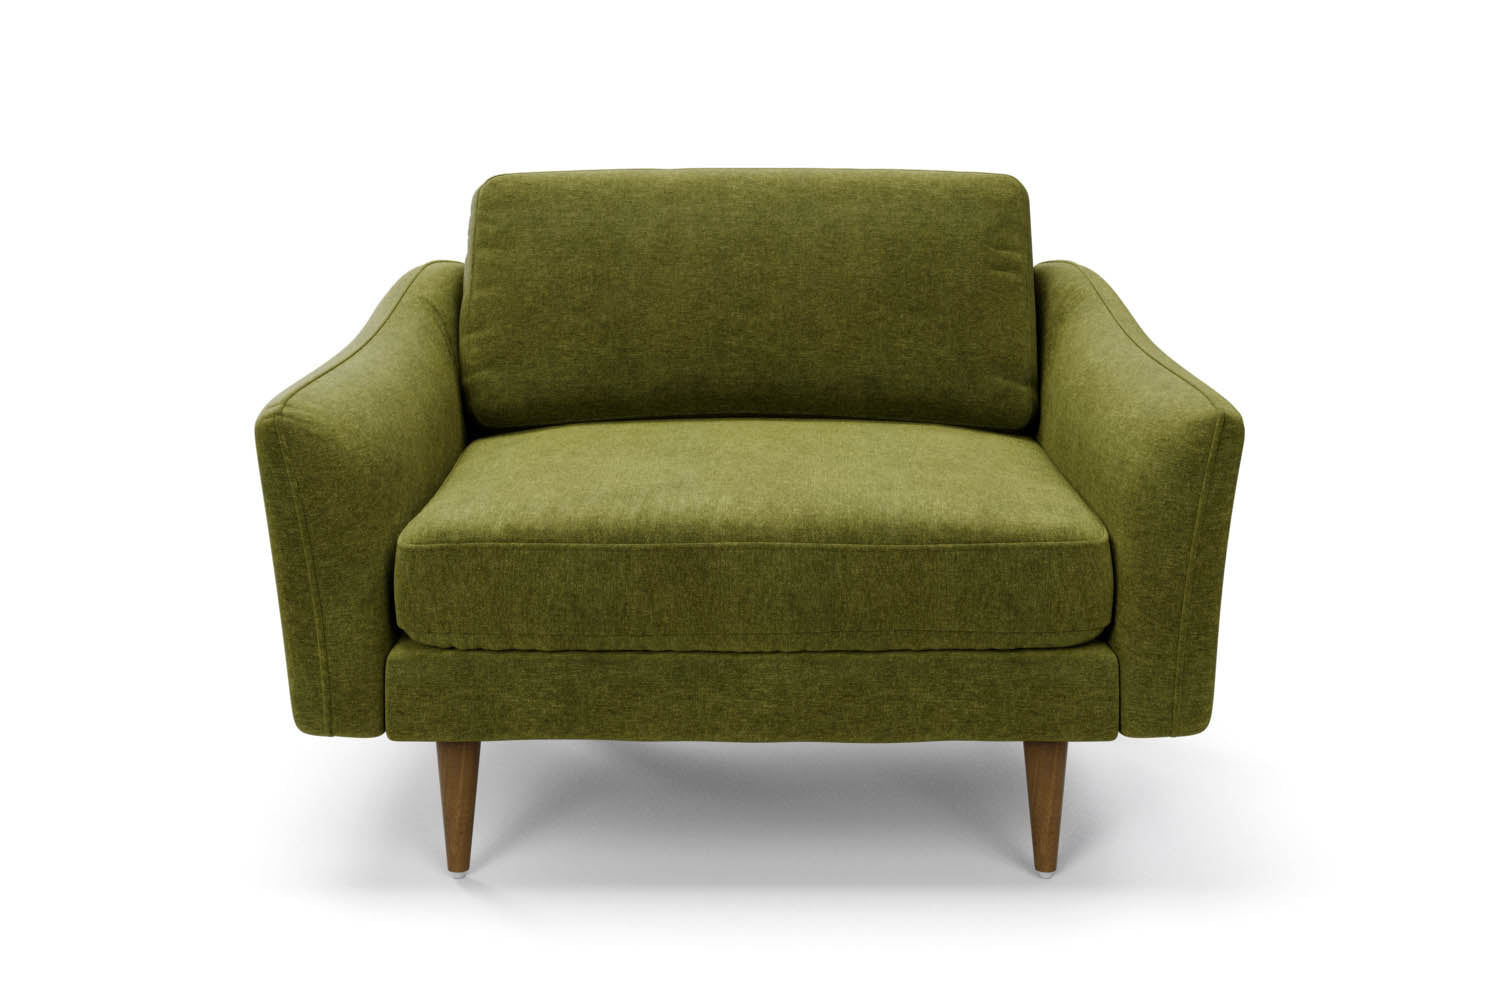 The Rebel Snuggler Sofa in Moss with brown legs front variant_40886297231408